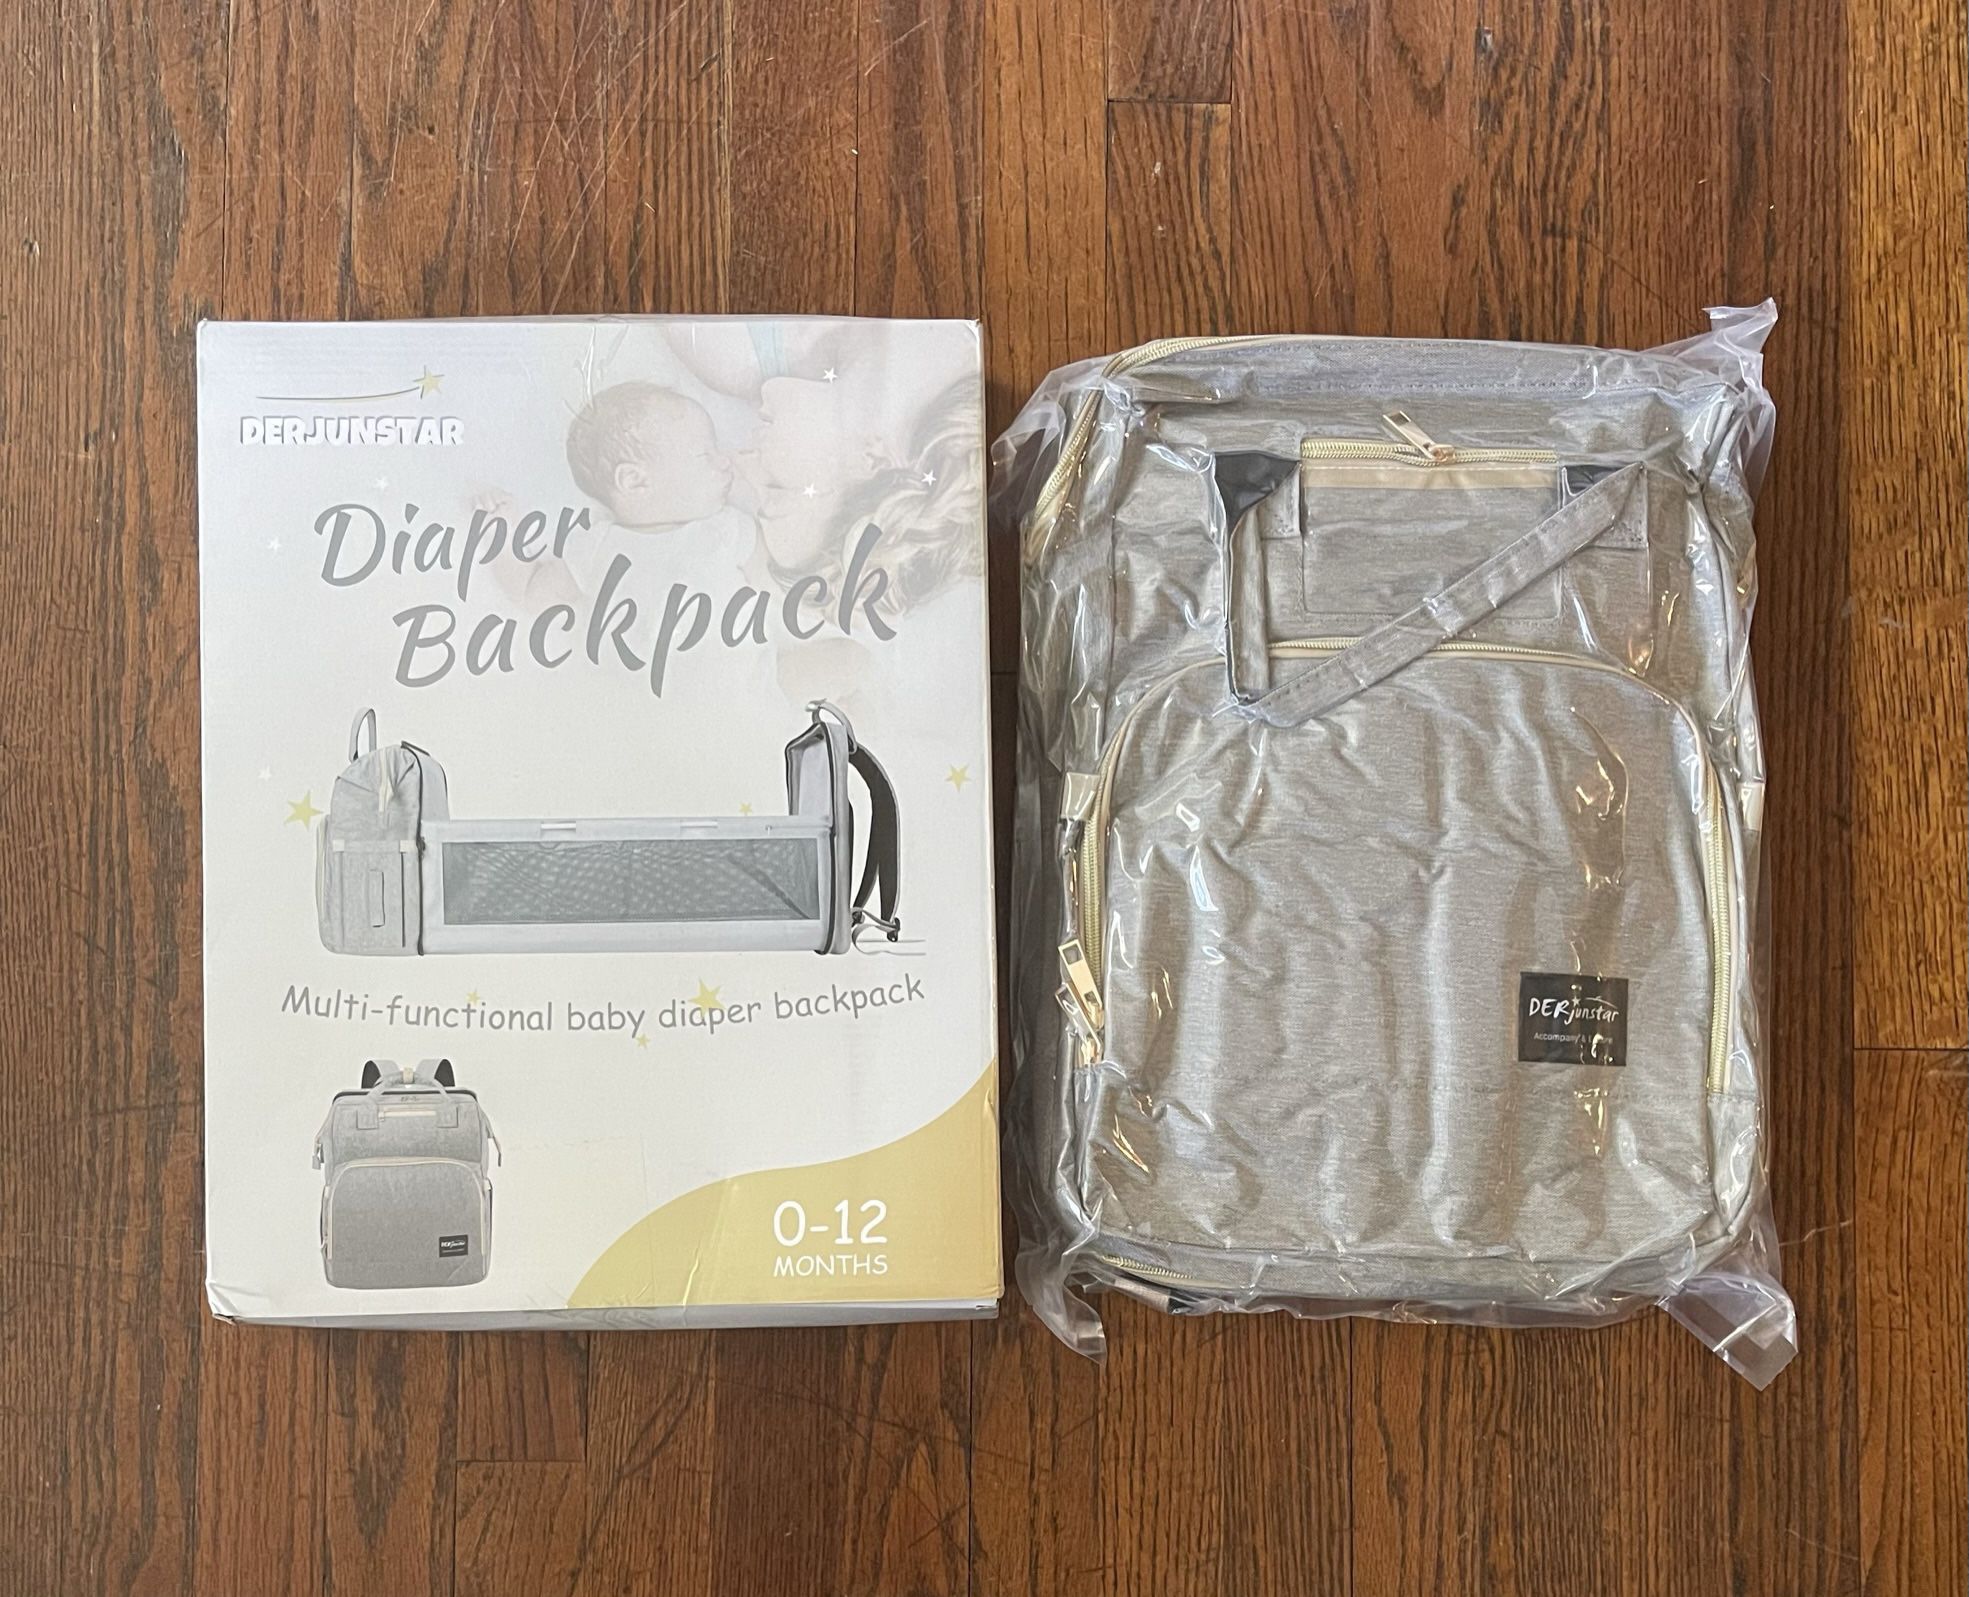 Diaper Backpack Changing Station